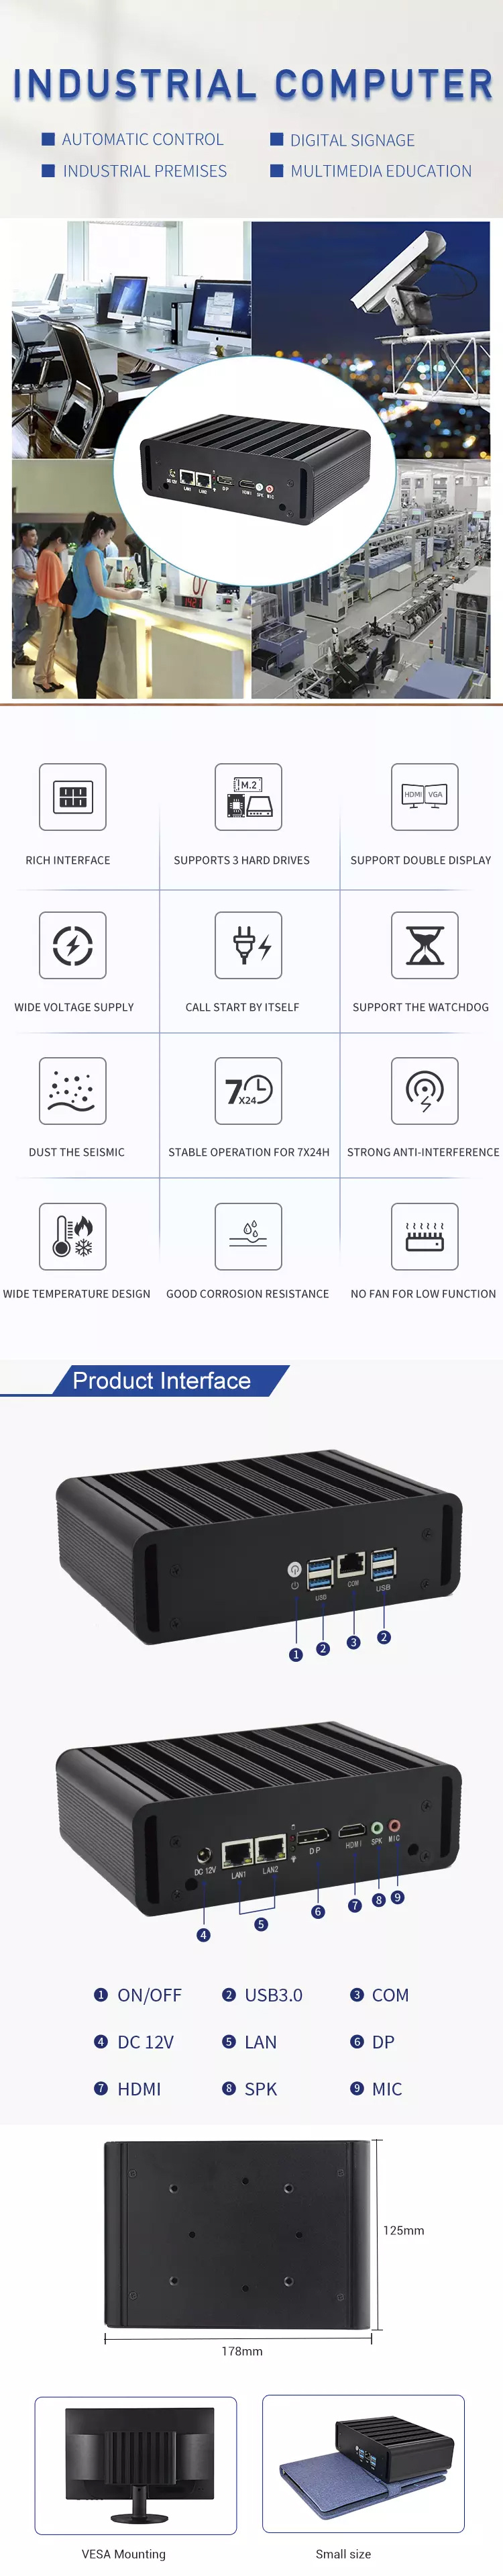 Fanless Core I3 I5 I7 Industrial Computer with Dual LAN Dual HD Mini Industrial PC